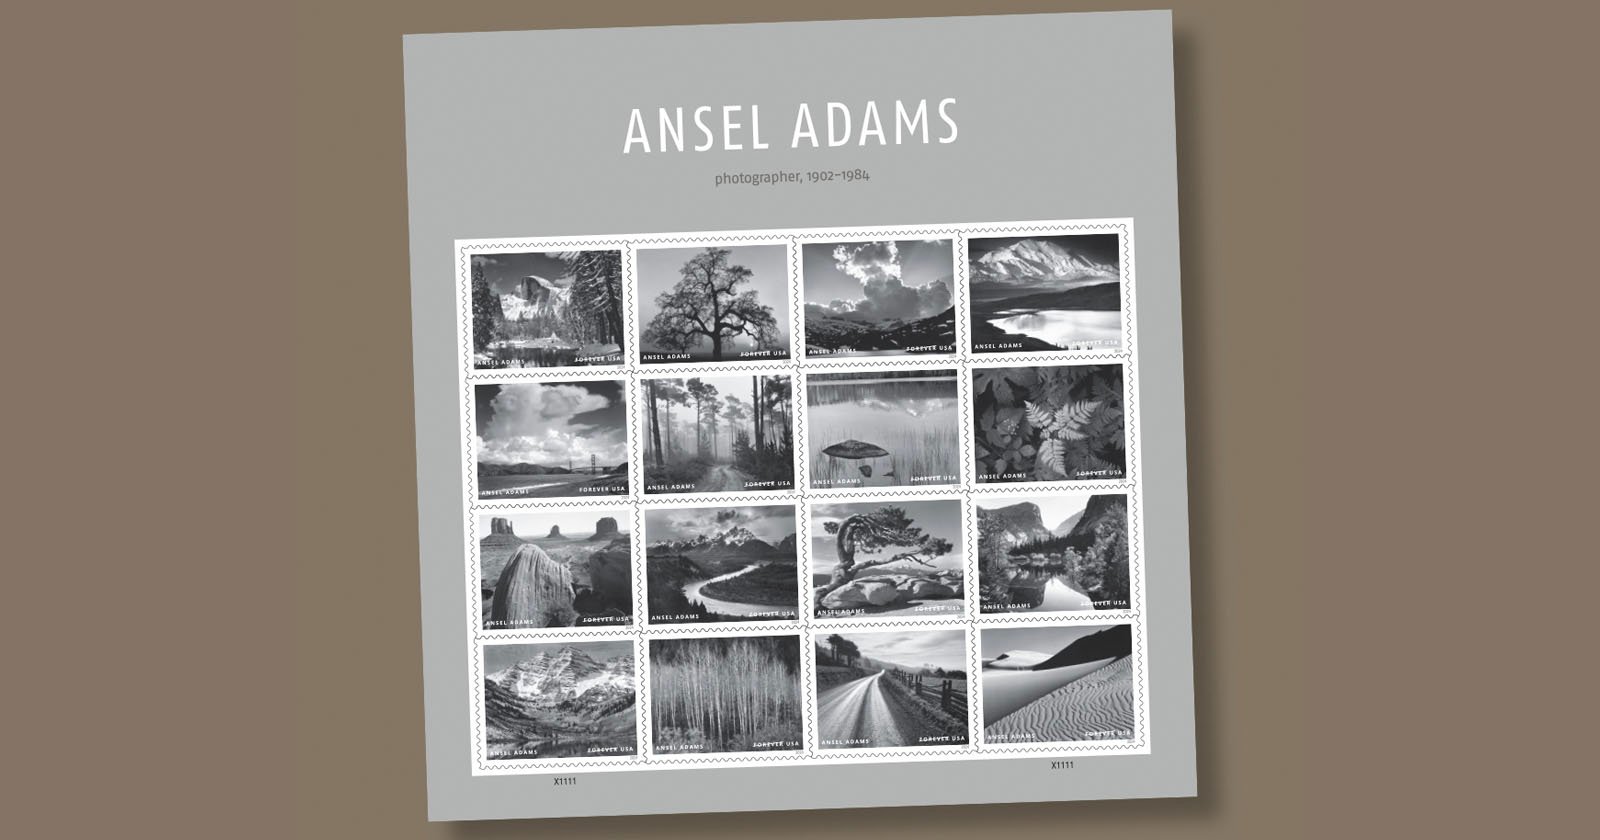 Legendary Ansel Adams Photos to Grace New Set of USPS Stamps